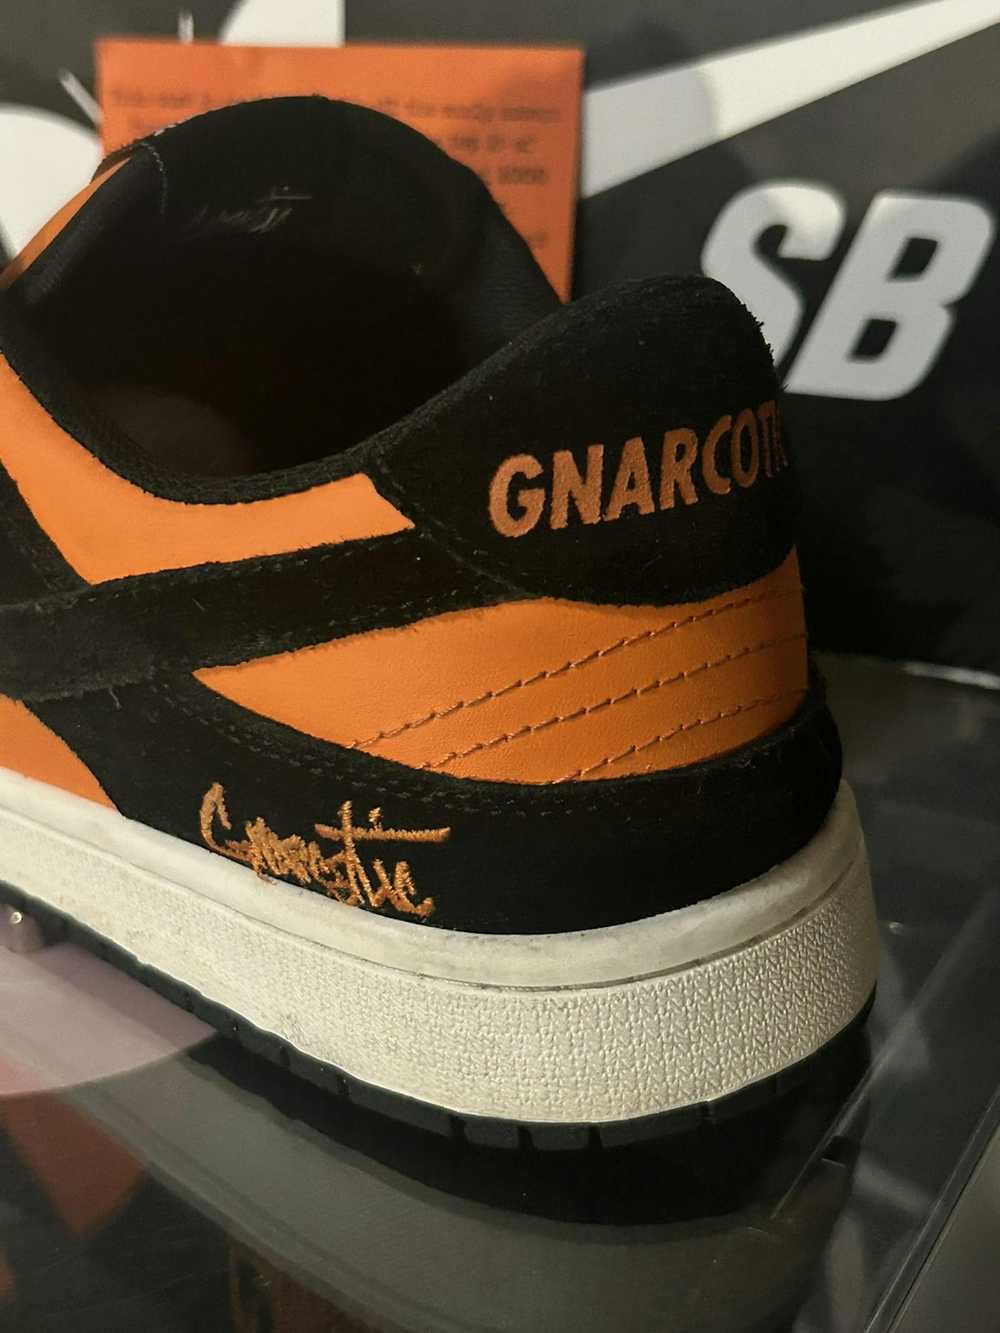 Gnarcotic gnarcotic sb sneakers - image 7